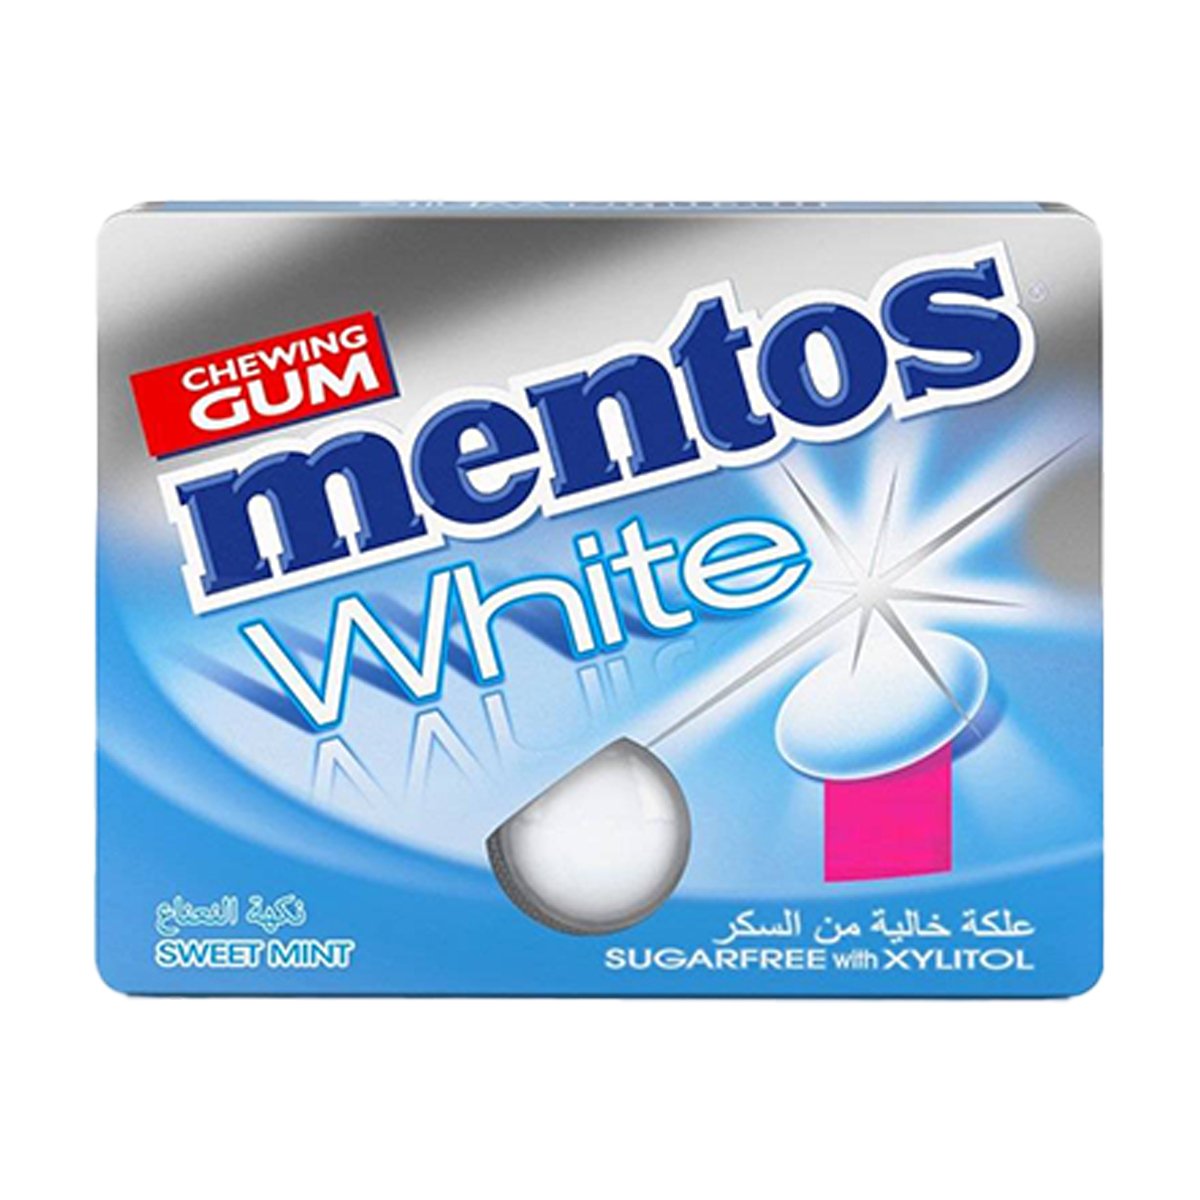 Mentos White Sweet Mint Chewing Gum 11.4 g